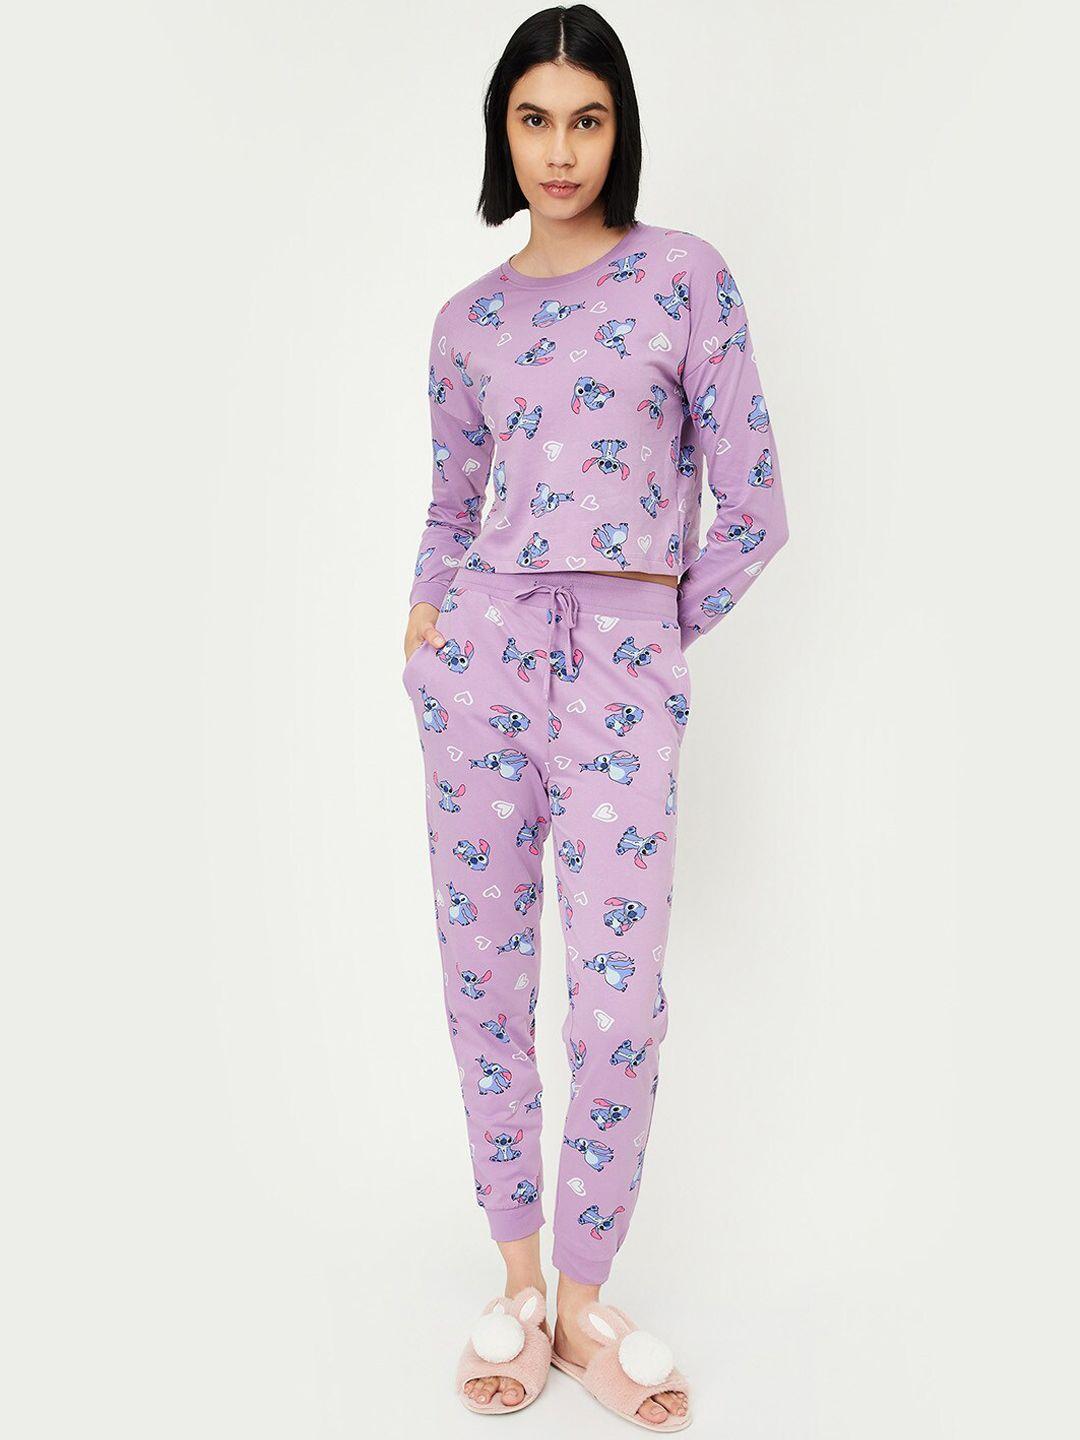 max conversational printed pure cotton night suit